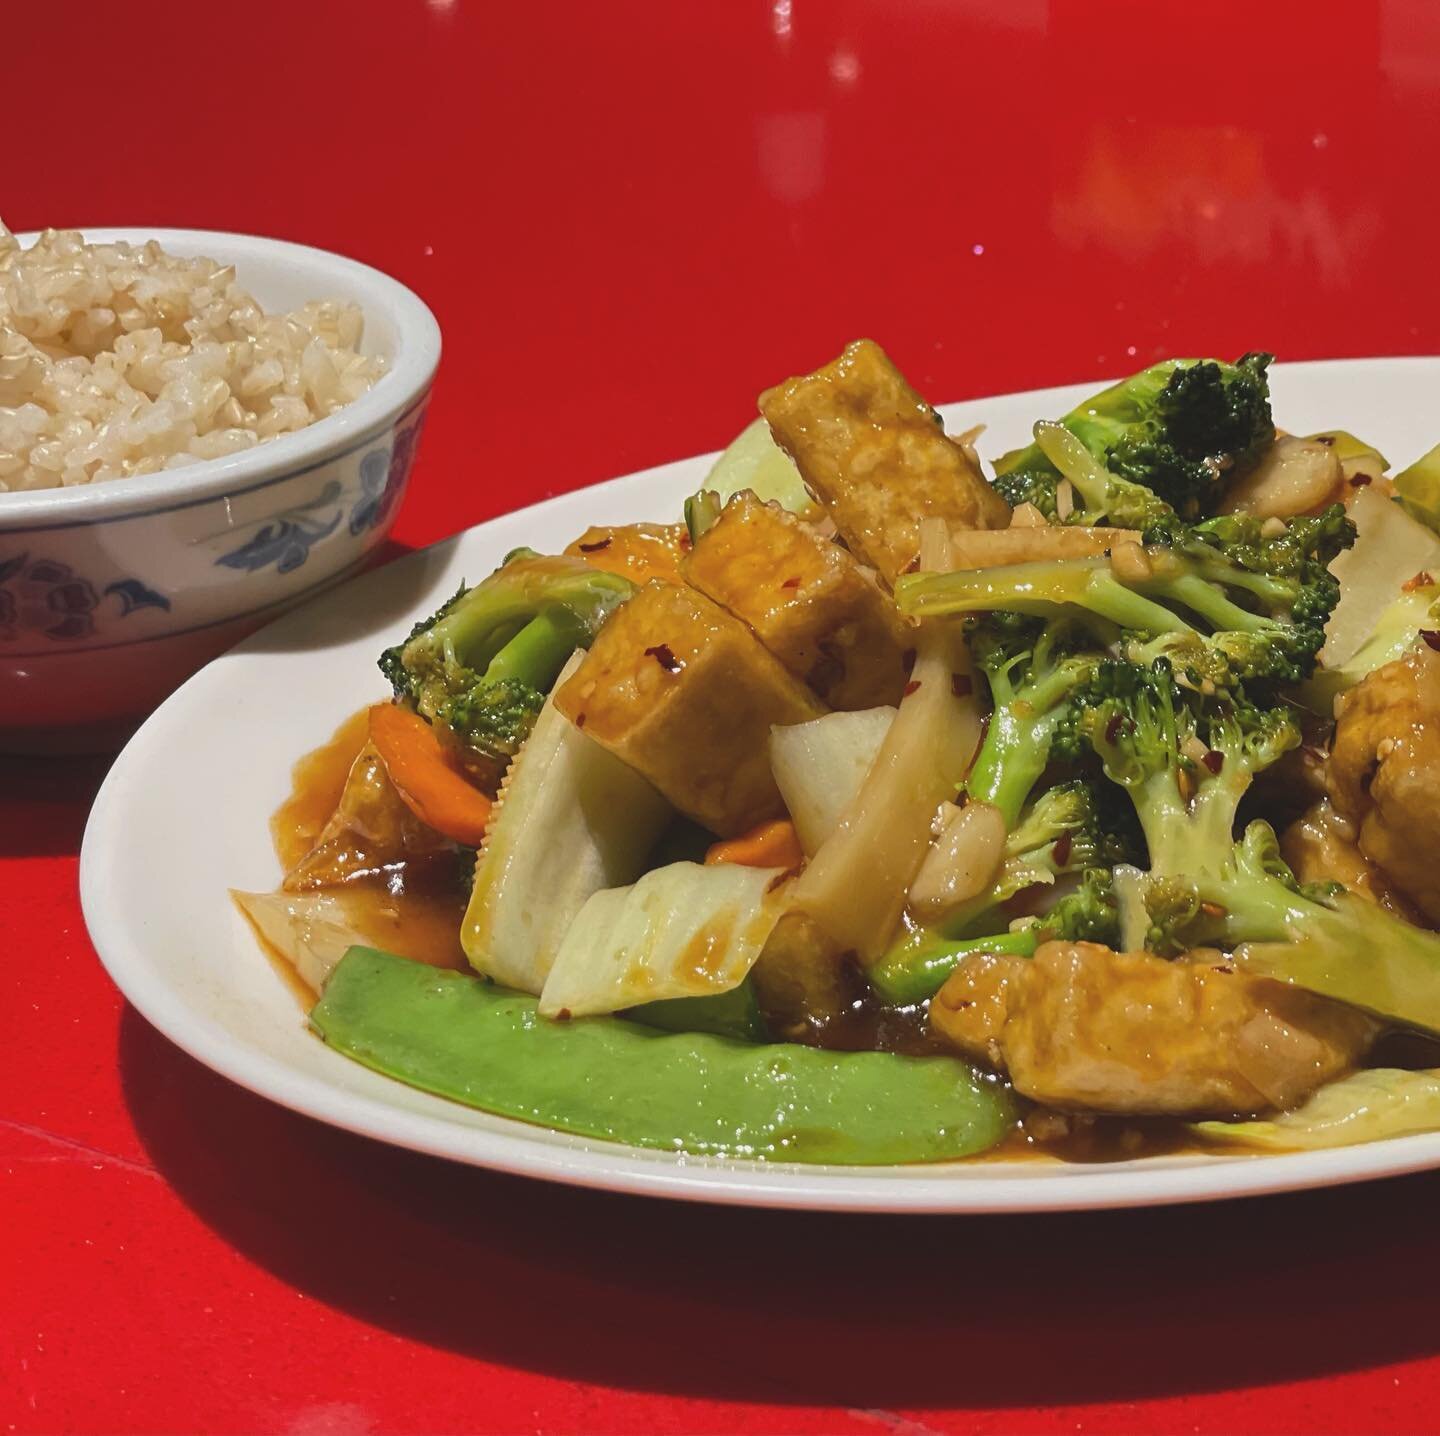 Looking for a place for your upcoming lunch hour date? Surprise your food-coma-partner-in-crime and come on over to ours. We recommend our Hunan Vegetables &amp; Tofu! 🥢 ✨ #houseoflumarietta #mariettasquare